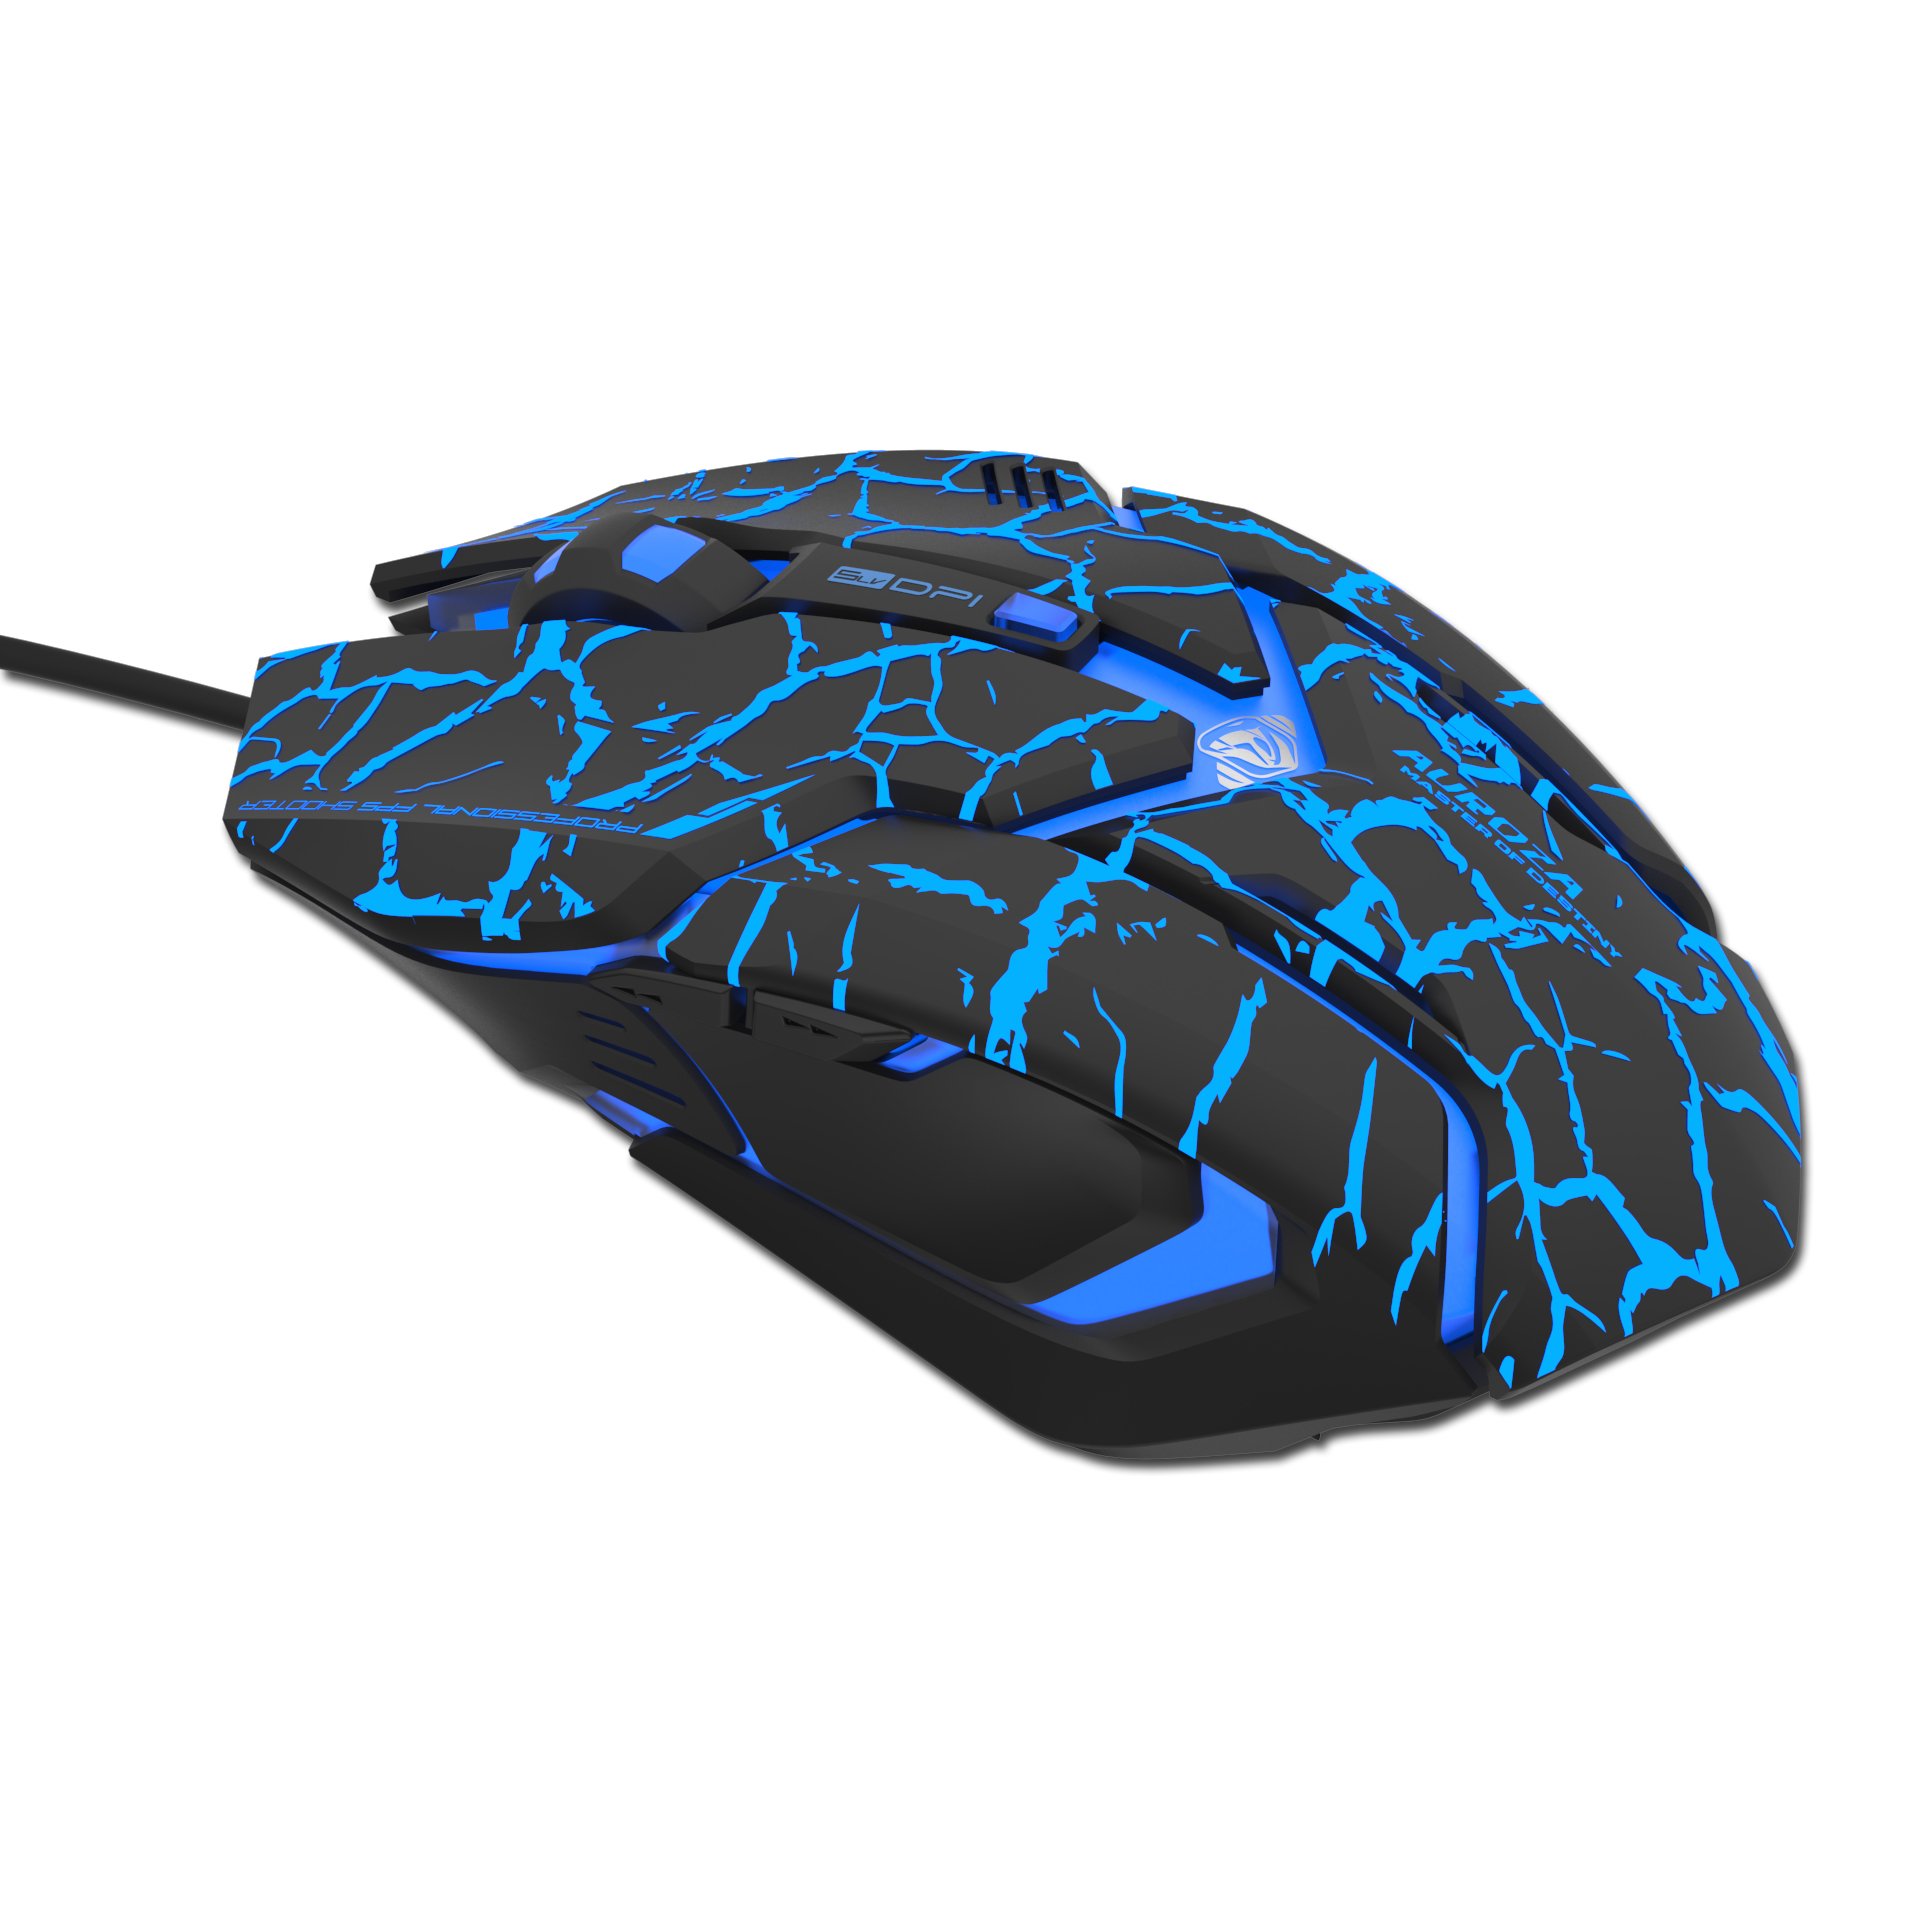 E-Blue Aurora Gaming Mouse with Additional Buttons / LED RGB / 4000 DPI / Avago Chipset / USB Black